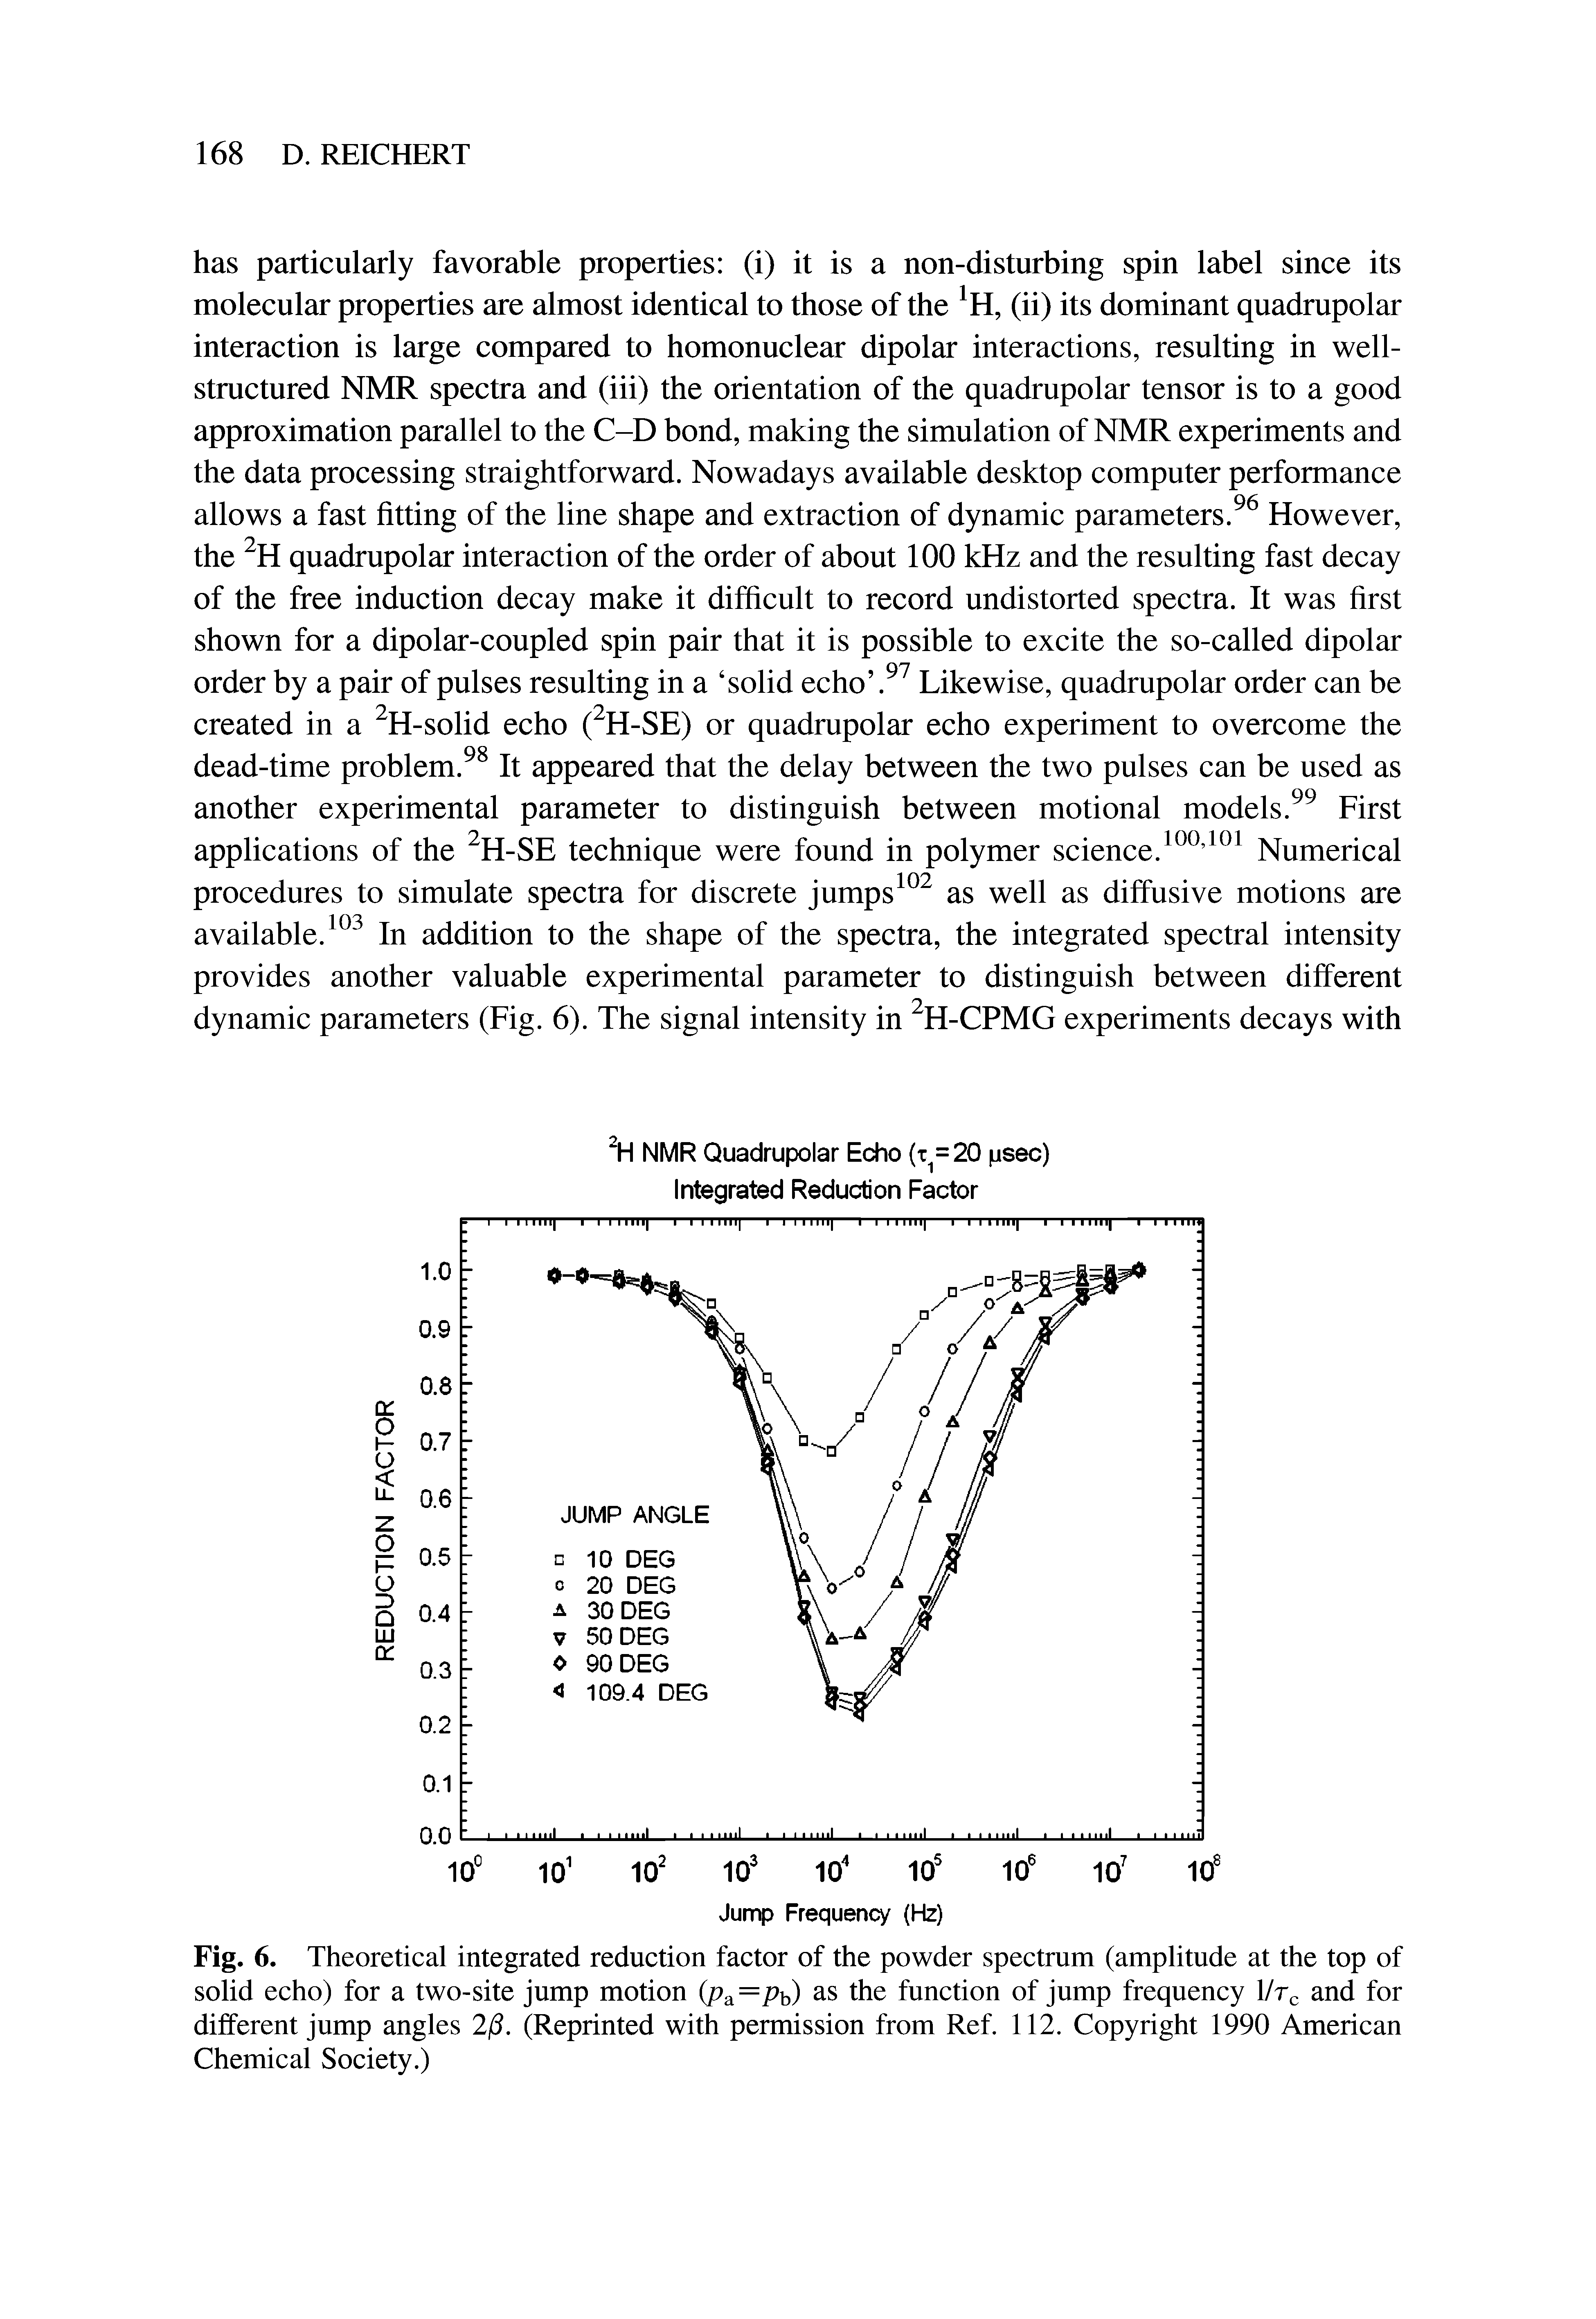 Fig. 6. Theoretical integrated reduction factor of the powder spectrum (amplitude at the top of solid echo) for a two-site jump motion (Pa=Pb) as the function of jump frequency 1/Tc and for different jump angles 2/ . (Reprinted with permission from Ref. 112. Copyright 1990 American Chemical Society.)...